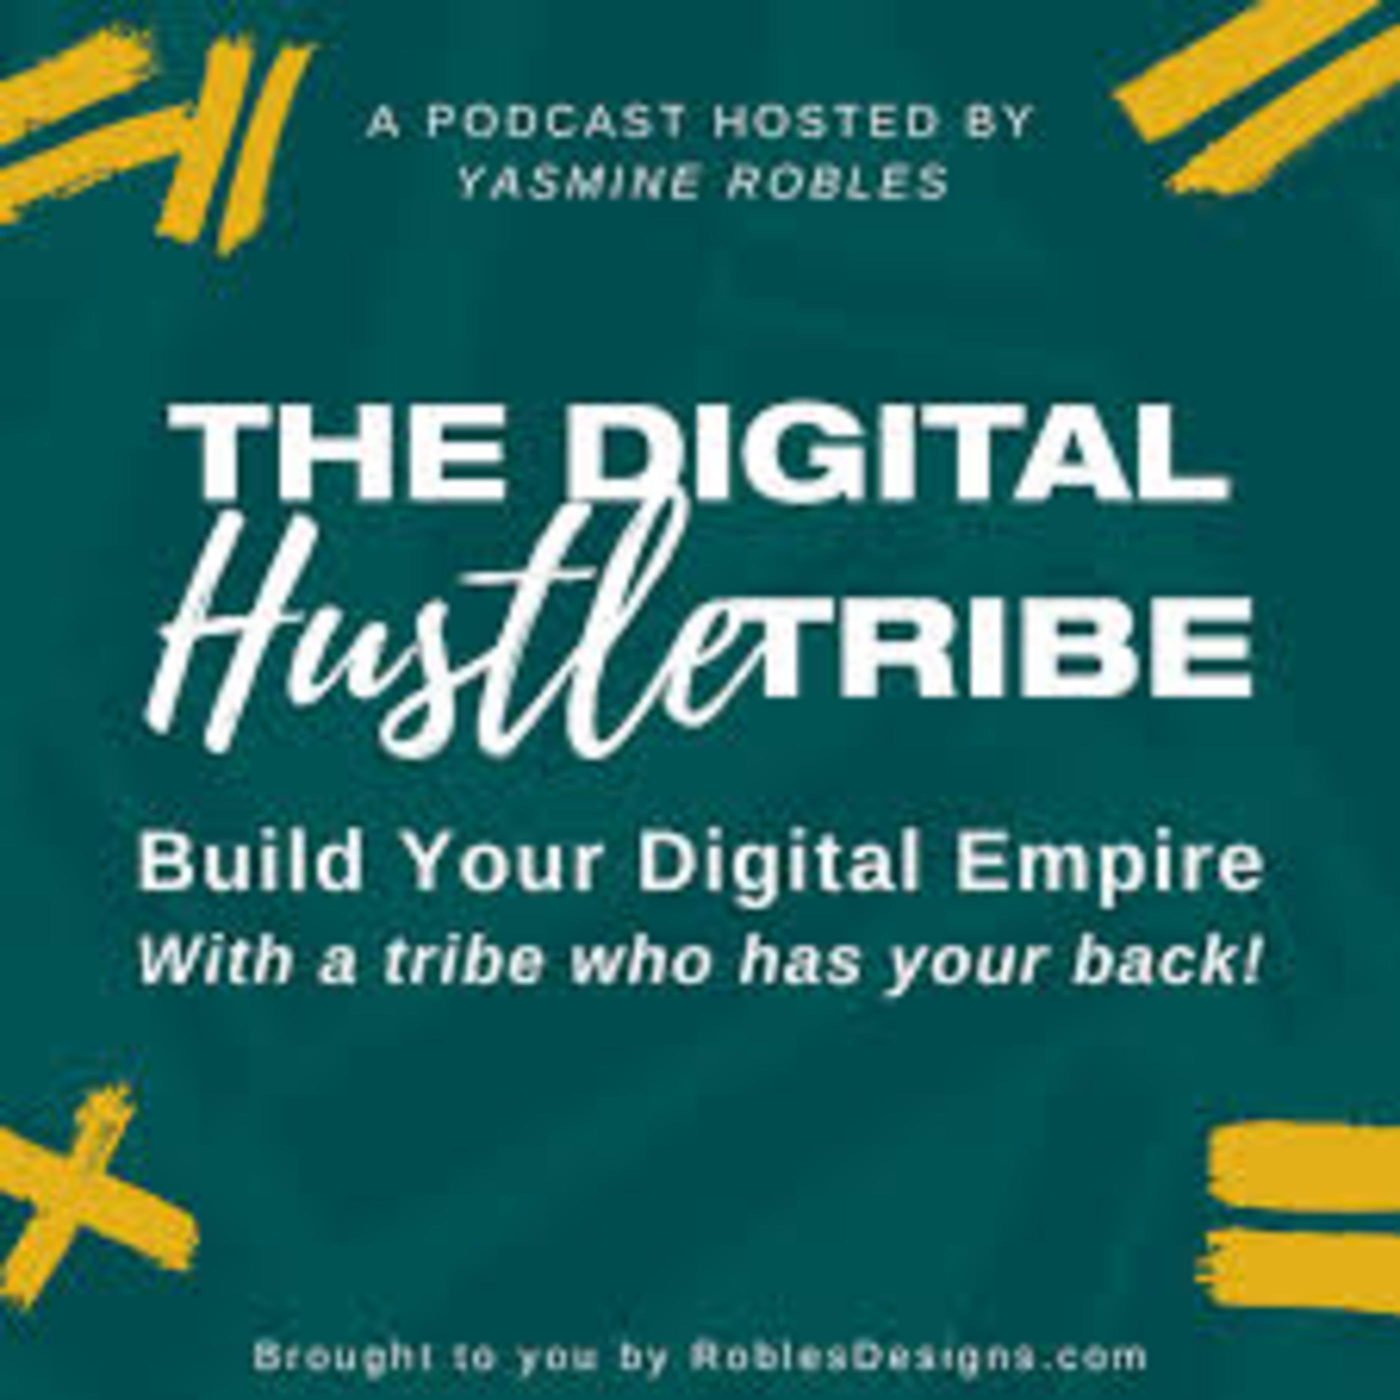 The Digital Hustle Tribe with Yasmine Robles